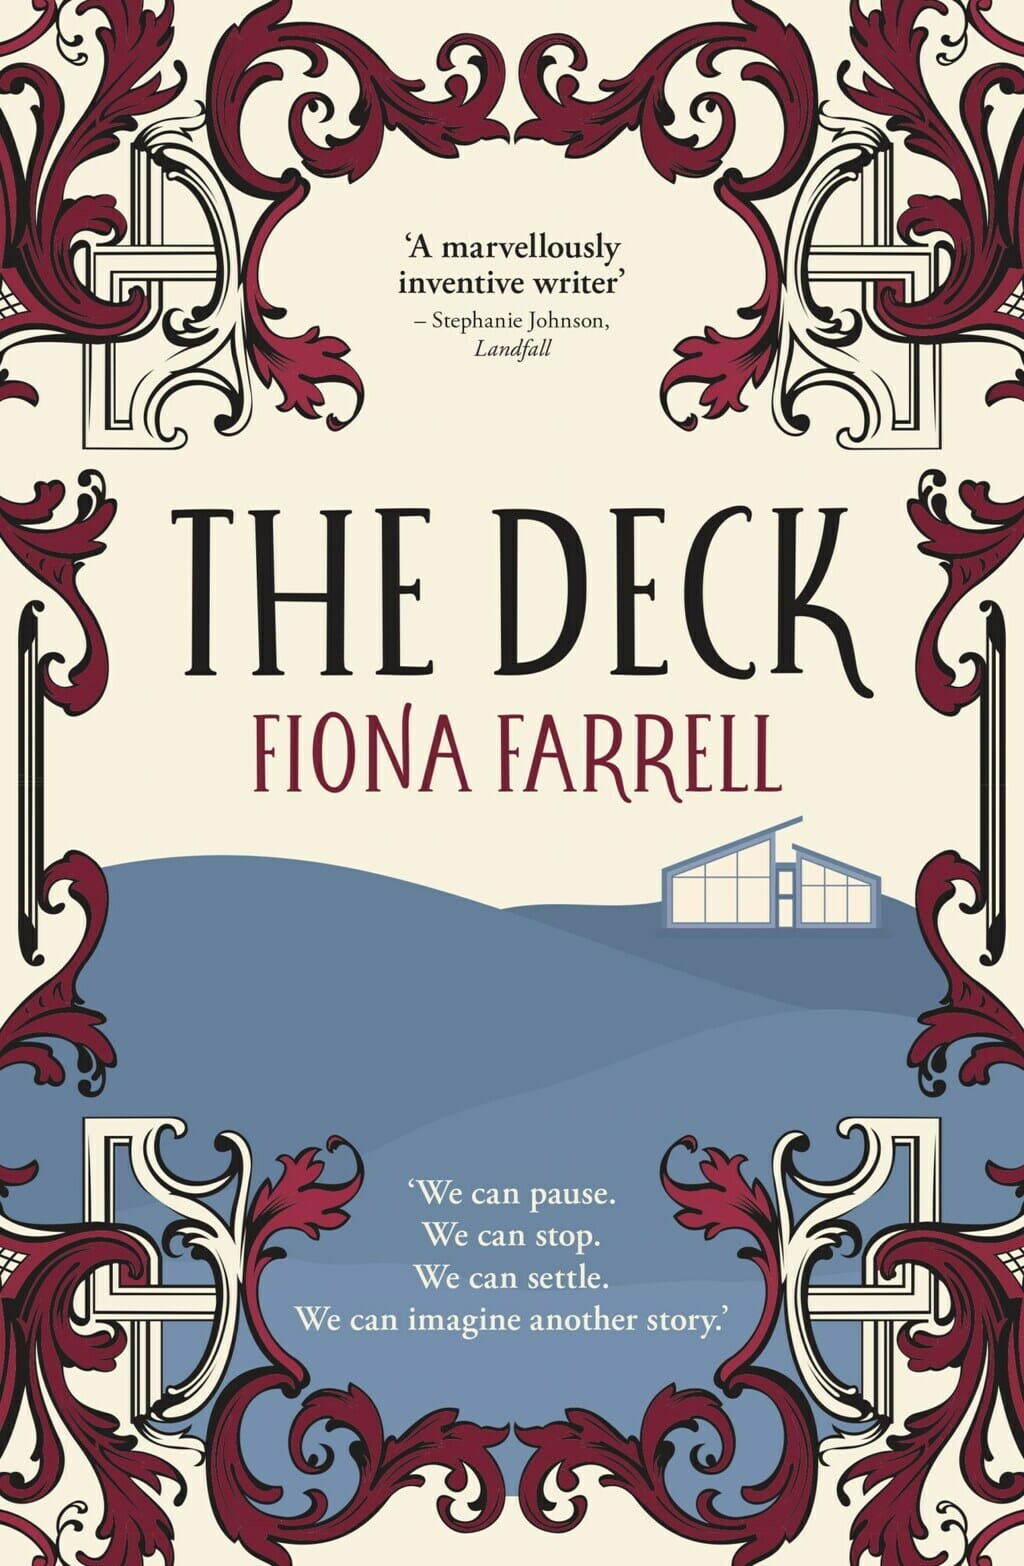 Woman+ Book Review: The Deck by Fiona Farrell